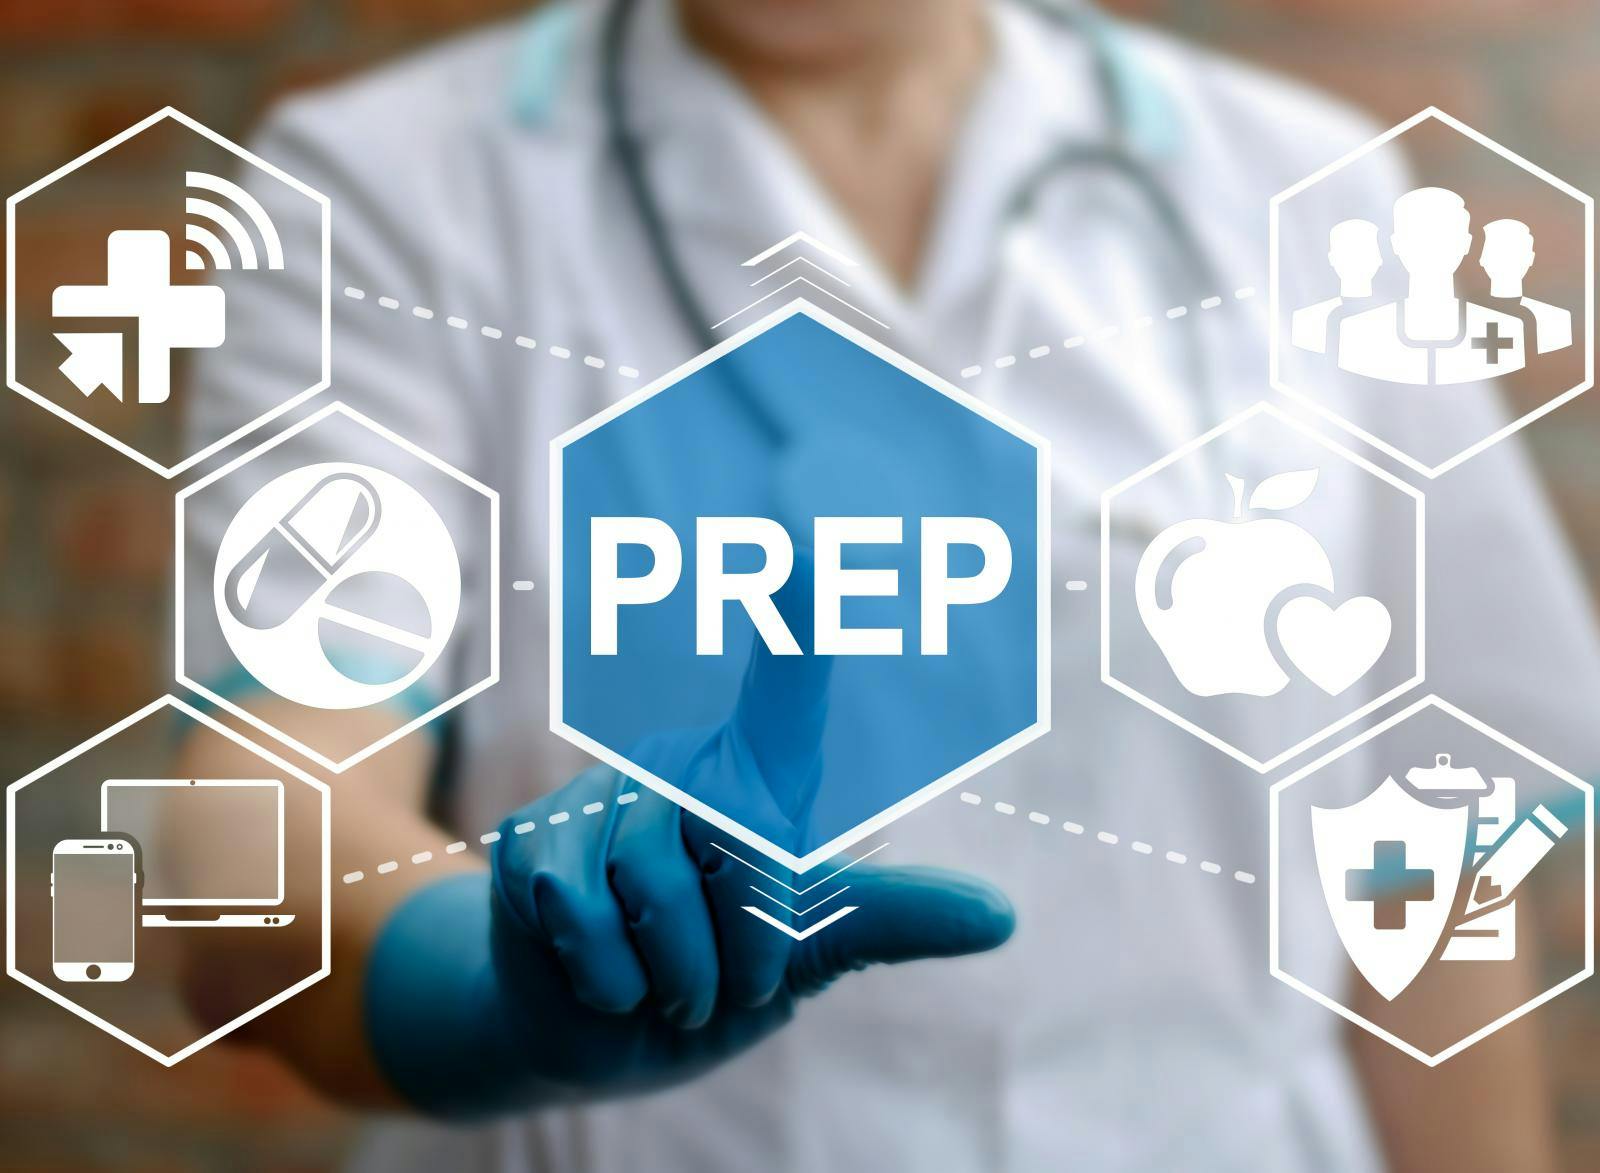 USPSTF Issues Guidance on PrEP Use in Individuals at High Risk of HIV